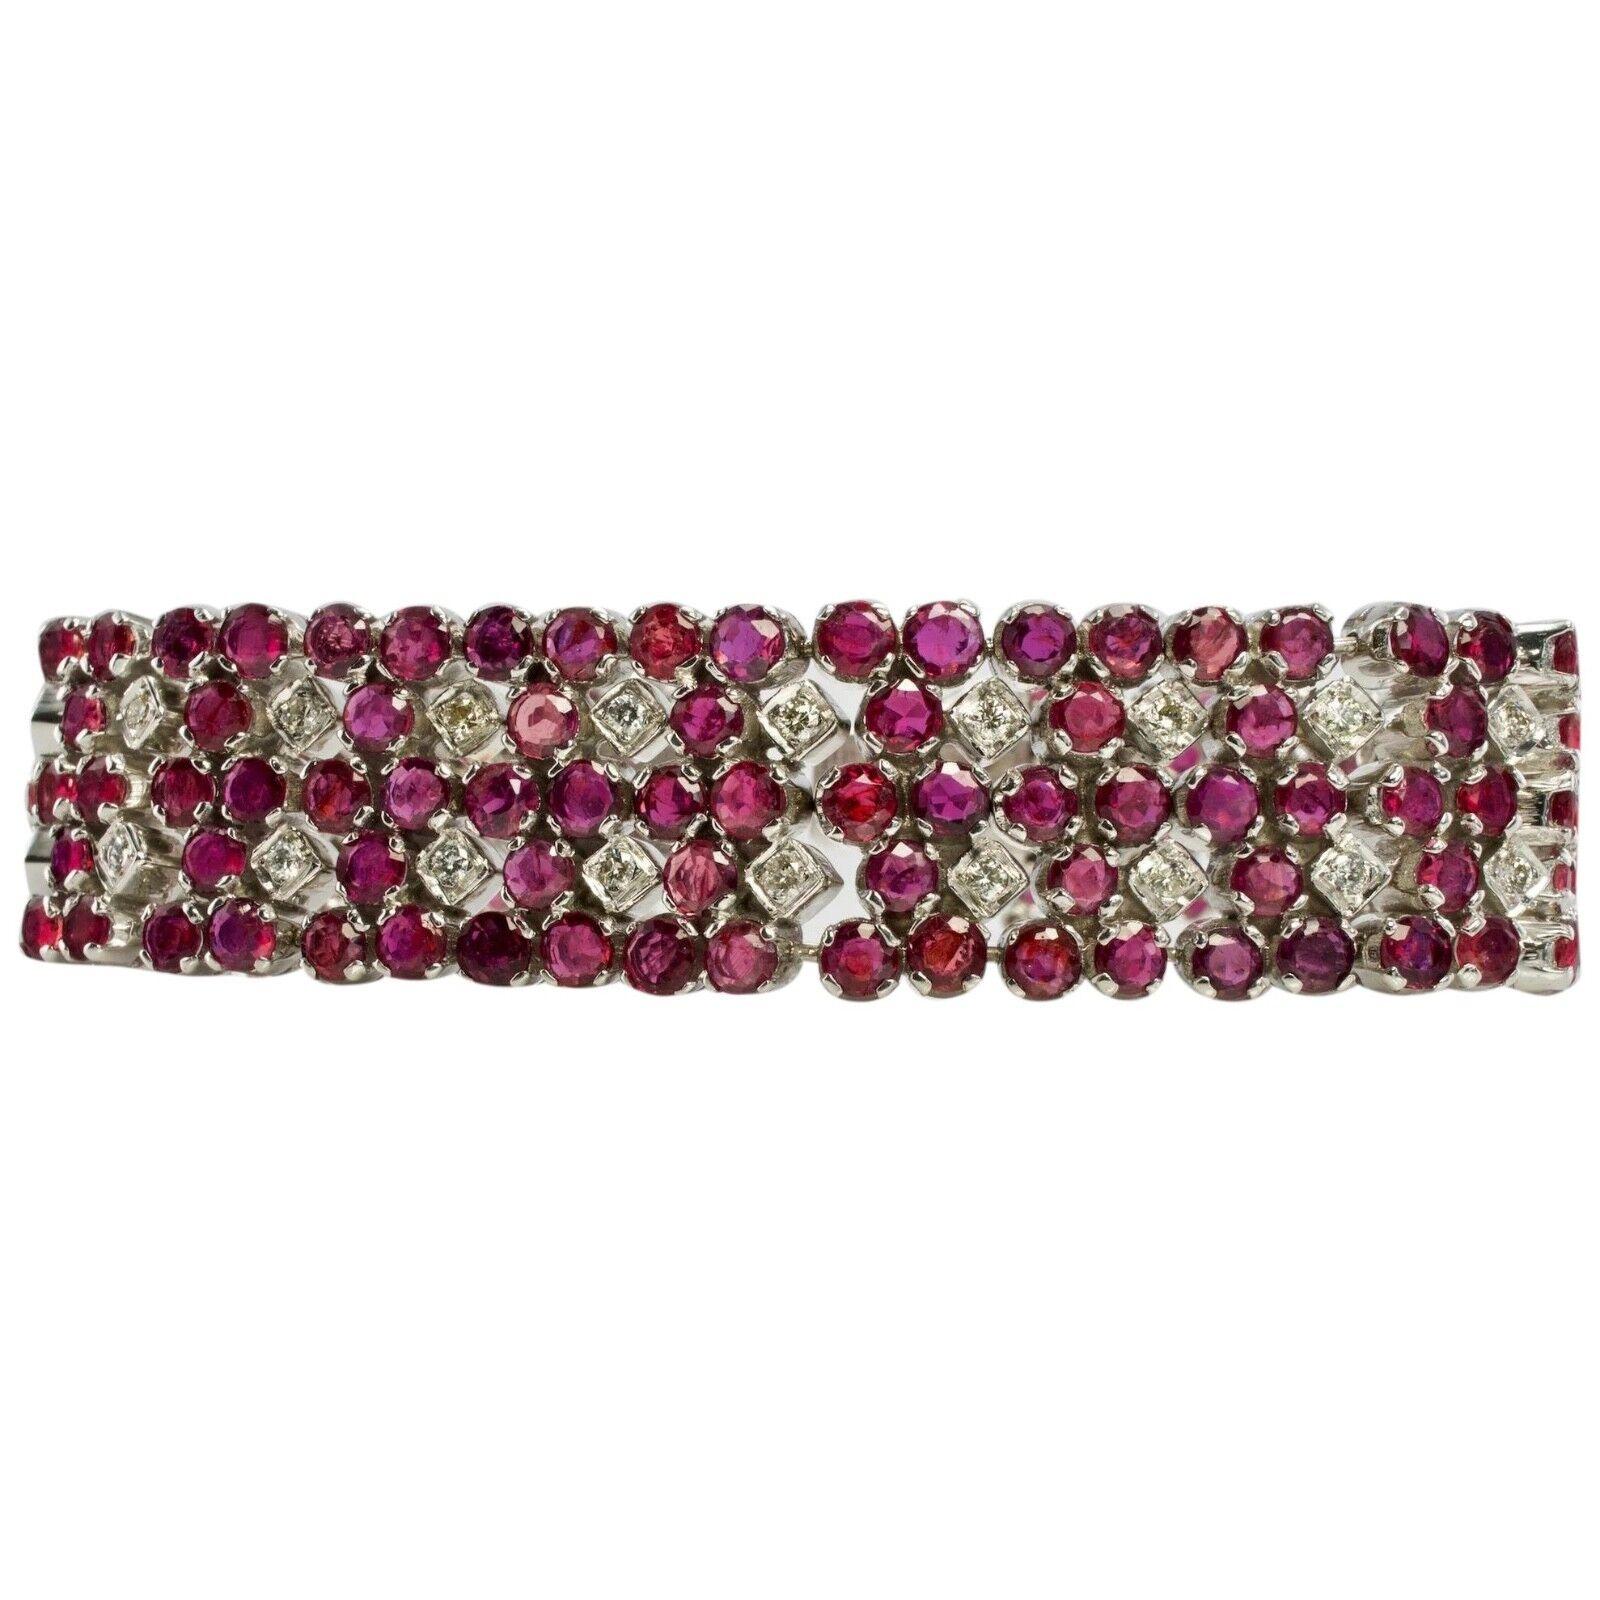 This terrific estate bracelet is finely crafted in solid 14K White Gold and set with natural Earth mined Rubies and Diamonds. There are 200 Rubies in this bracelet, grading from 2mm to 3mm for the grand total weight 20.00 carats! The rubies are very